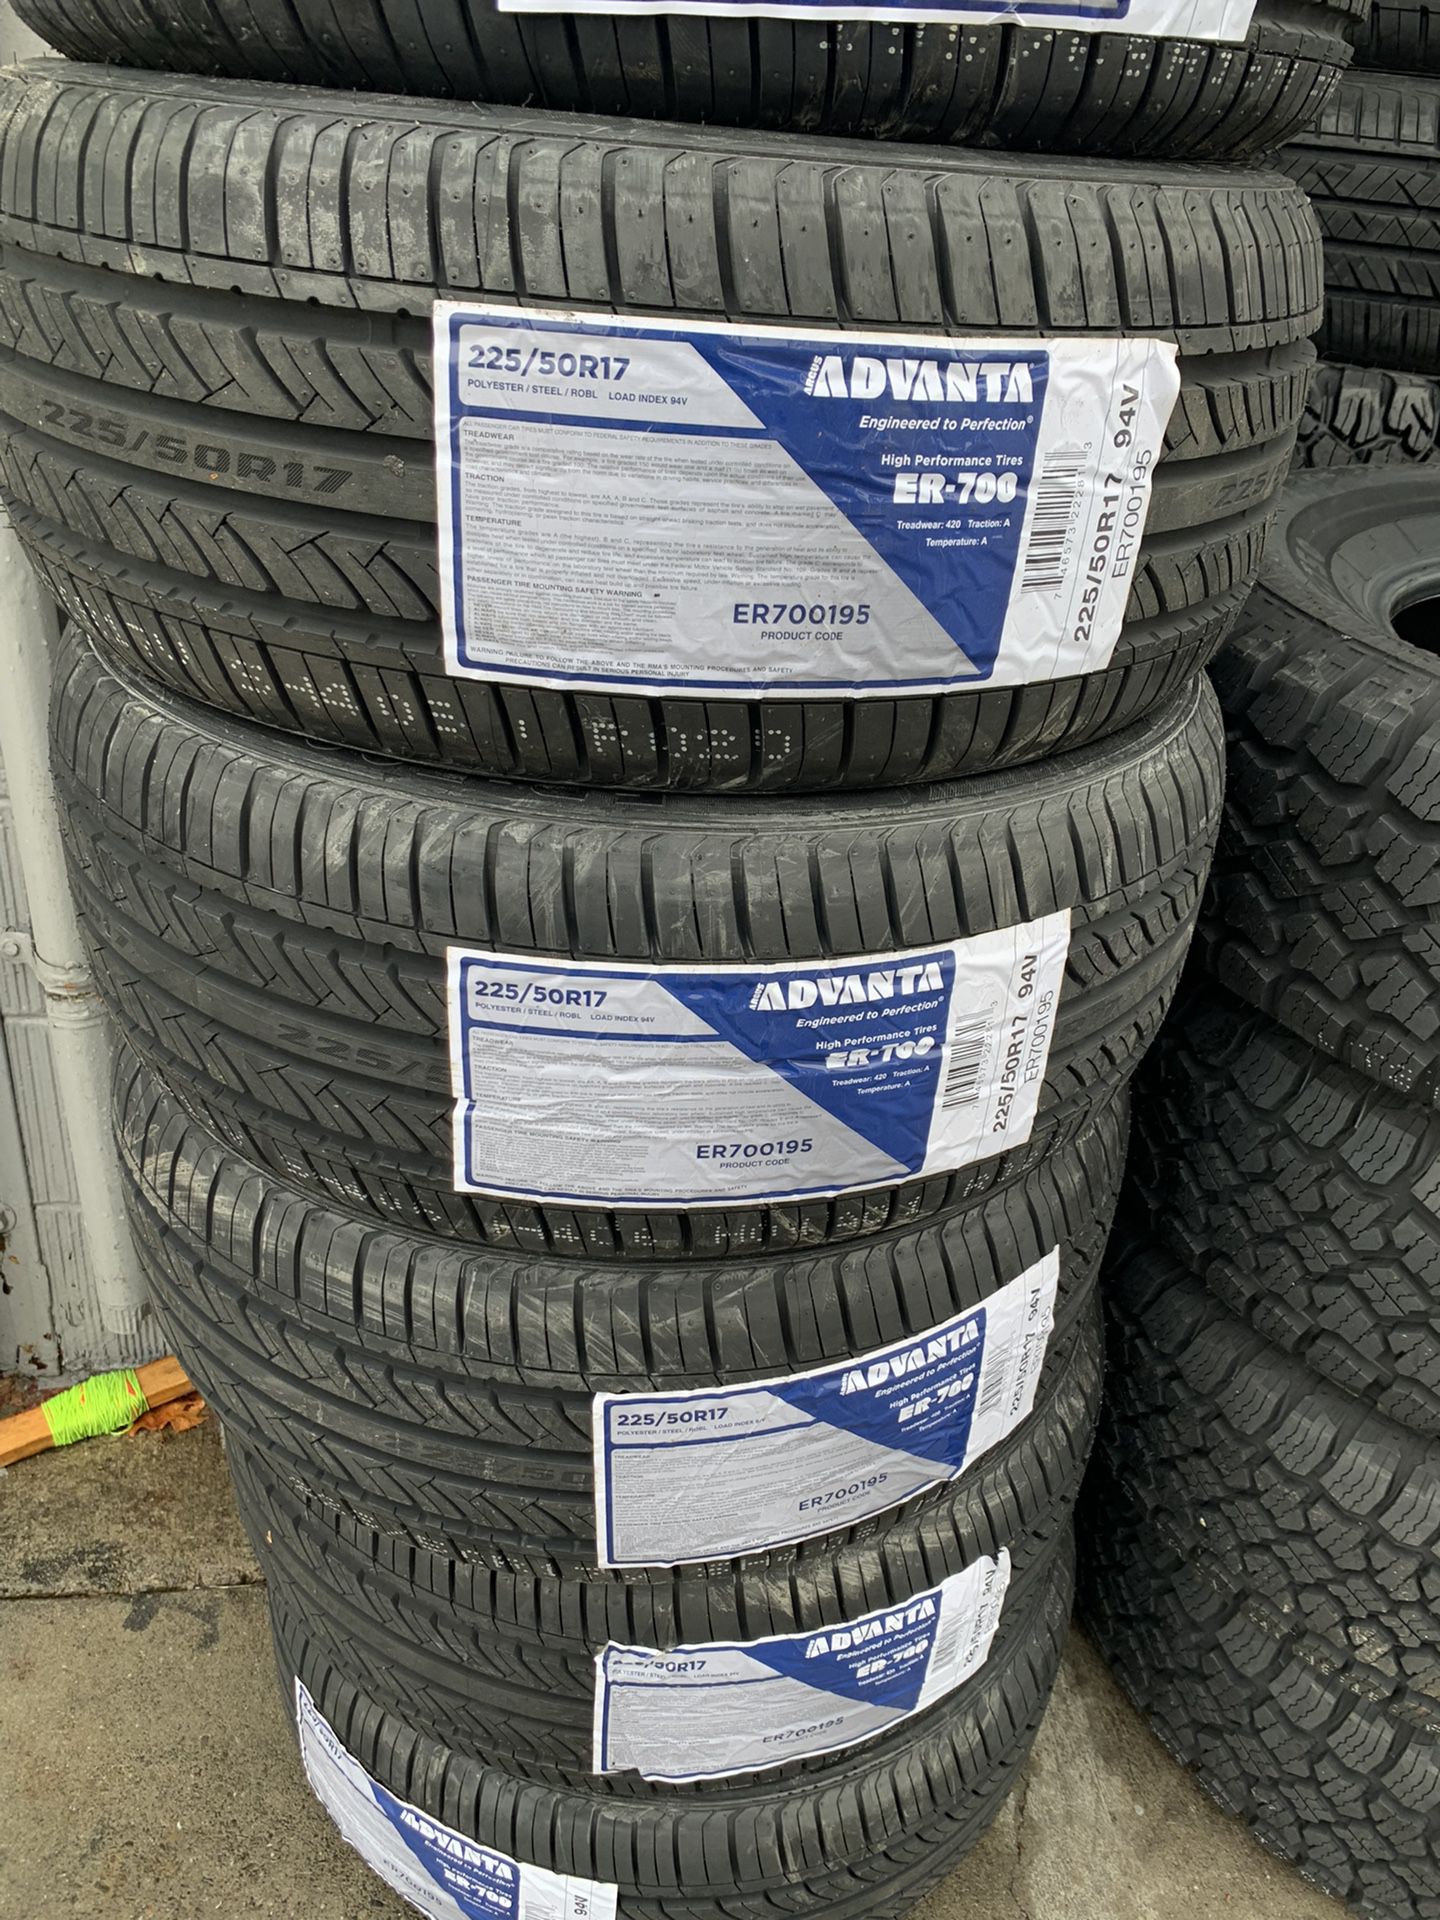 Brand New Tires 225/50r17 ADVANTA ER700 For Sale Set Of 4 Tires $409With Free Mount And Balance